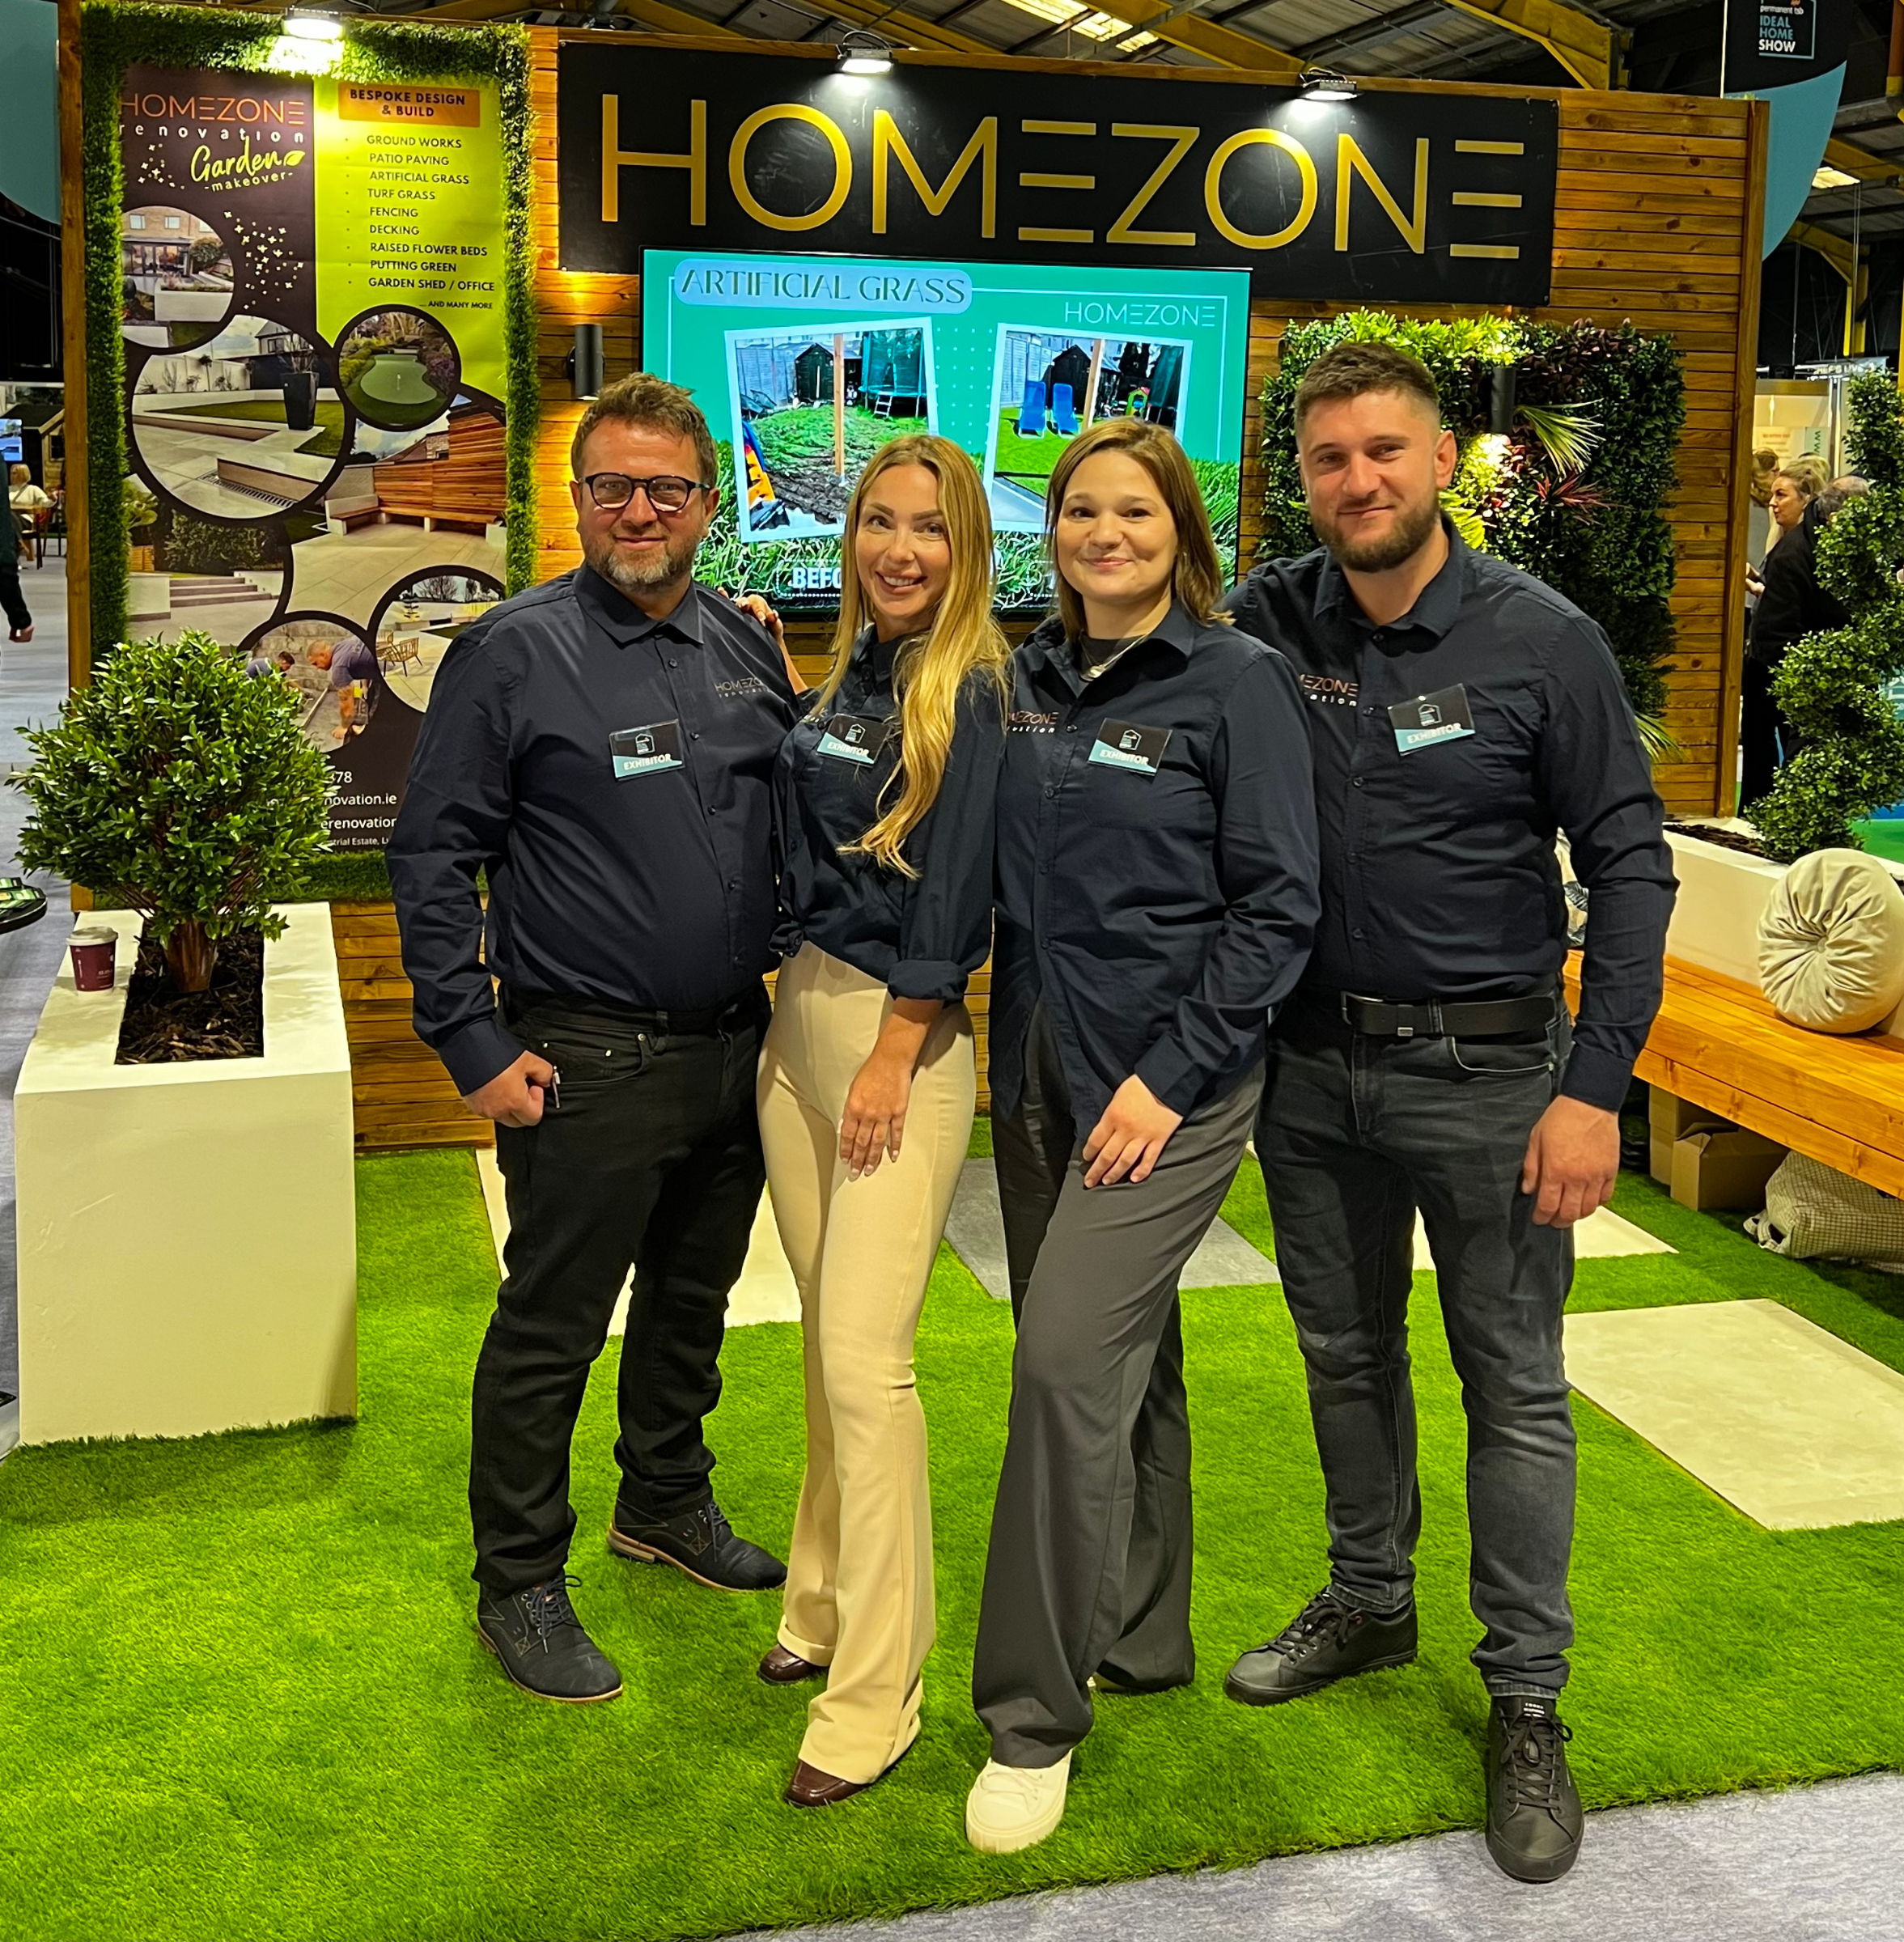 Homezone Garden Renovation team at Ideal Home Show